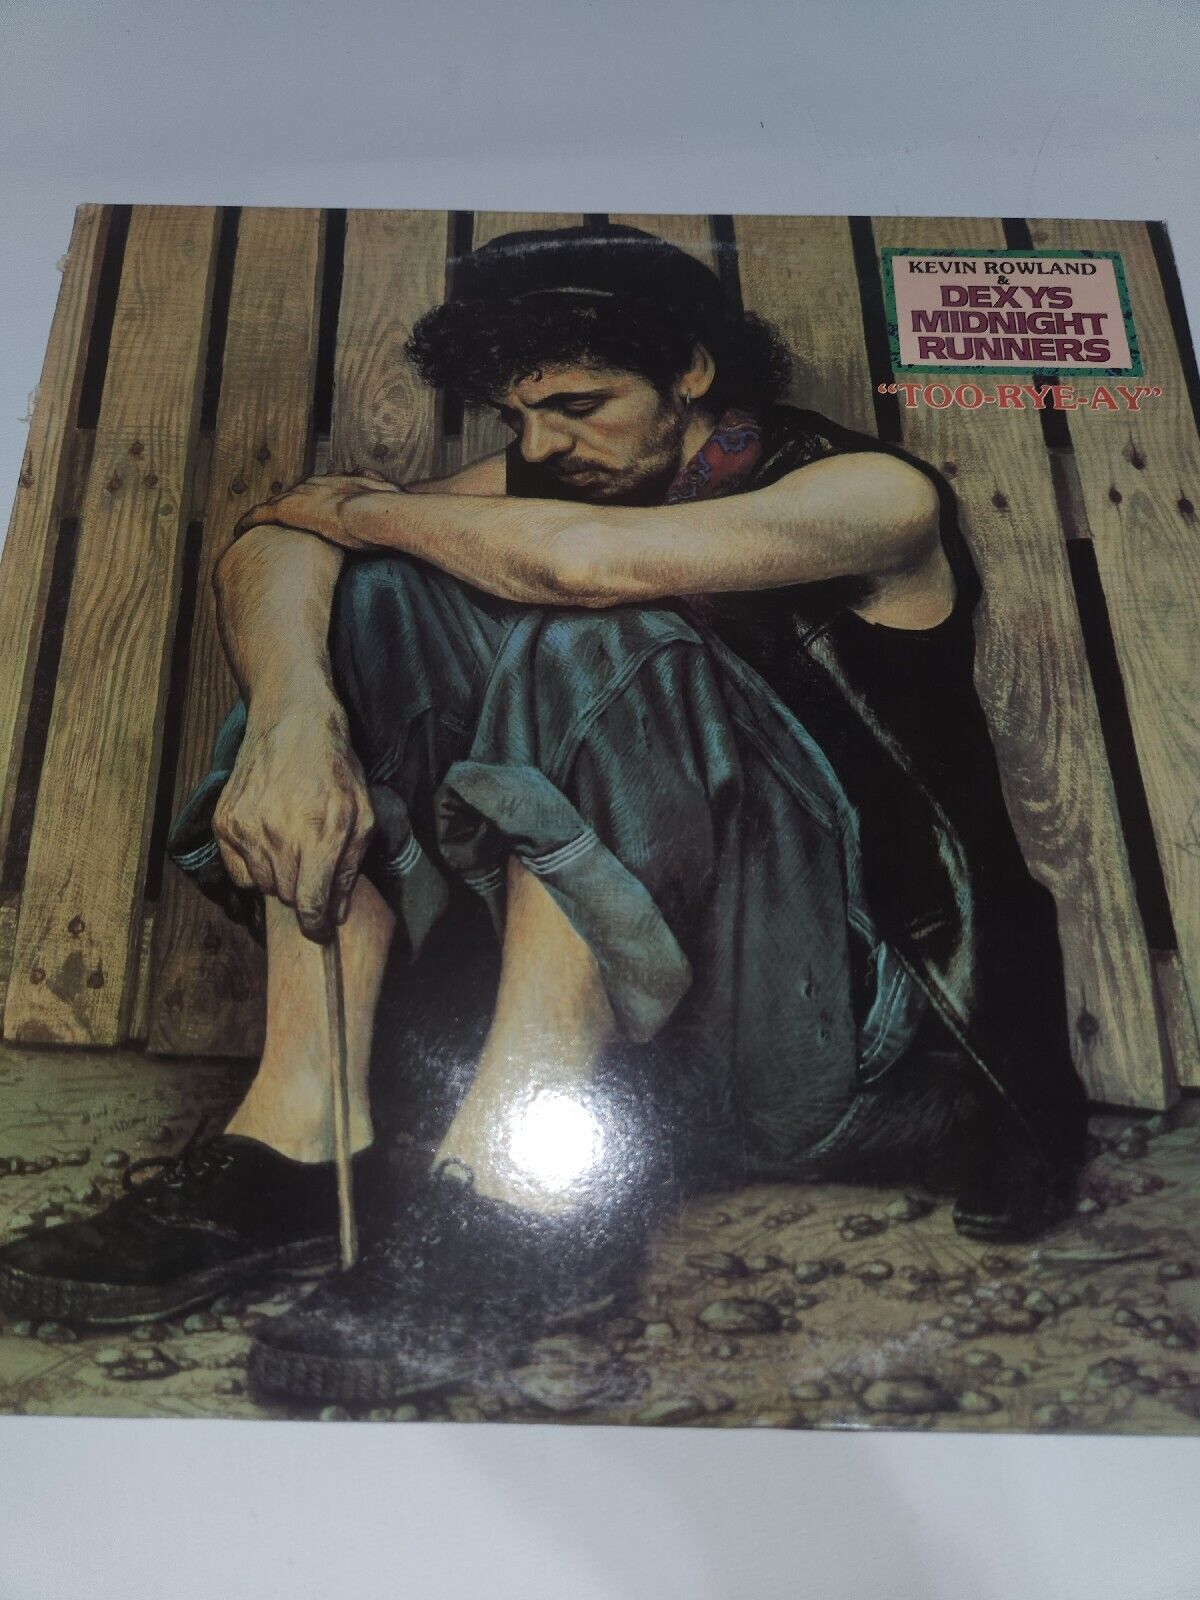 Kevin Rowland & Dexys Midnight Runners Too-Rye-Ay LP vinyl record RARE, VG+ / EX